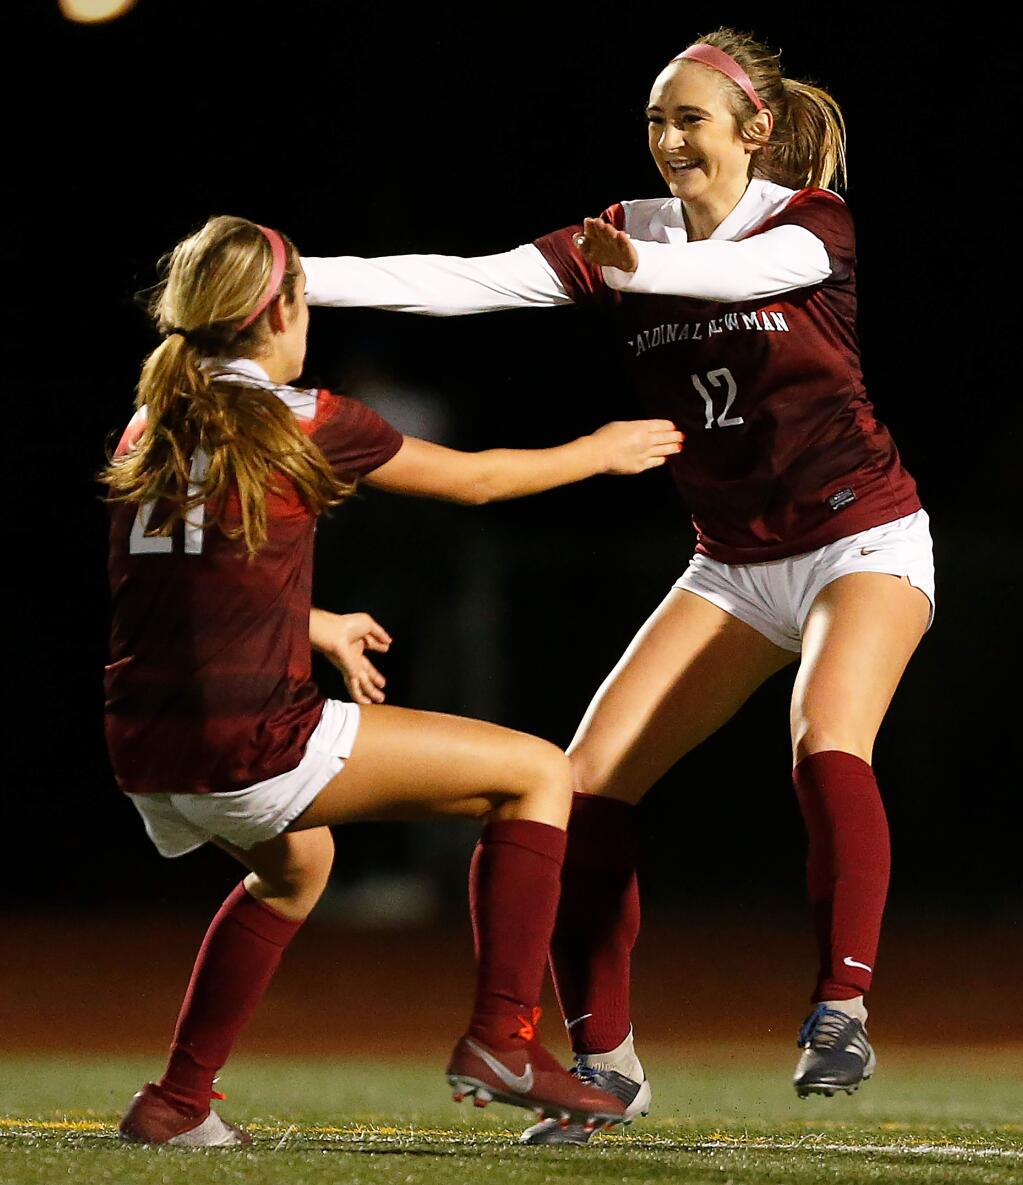 Cardinal Newman's Ella Wright, right, embraces teammate Keely Roy after Wright scored the Cardinals' first goal during the first half of the NCS Division IV girls varsity soccer final match between Marin Academy and Cardinal Newman high schools, in Santa Rosa, California, on Saturday, February 23, 2019. (Alvin Jornada / The Press Democrat)